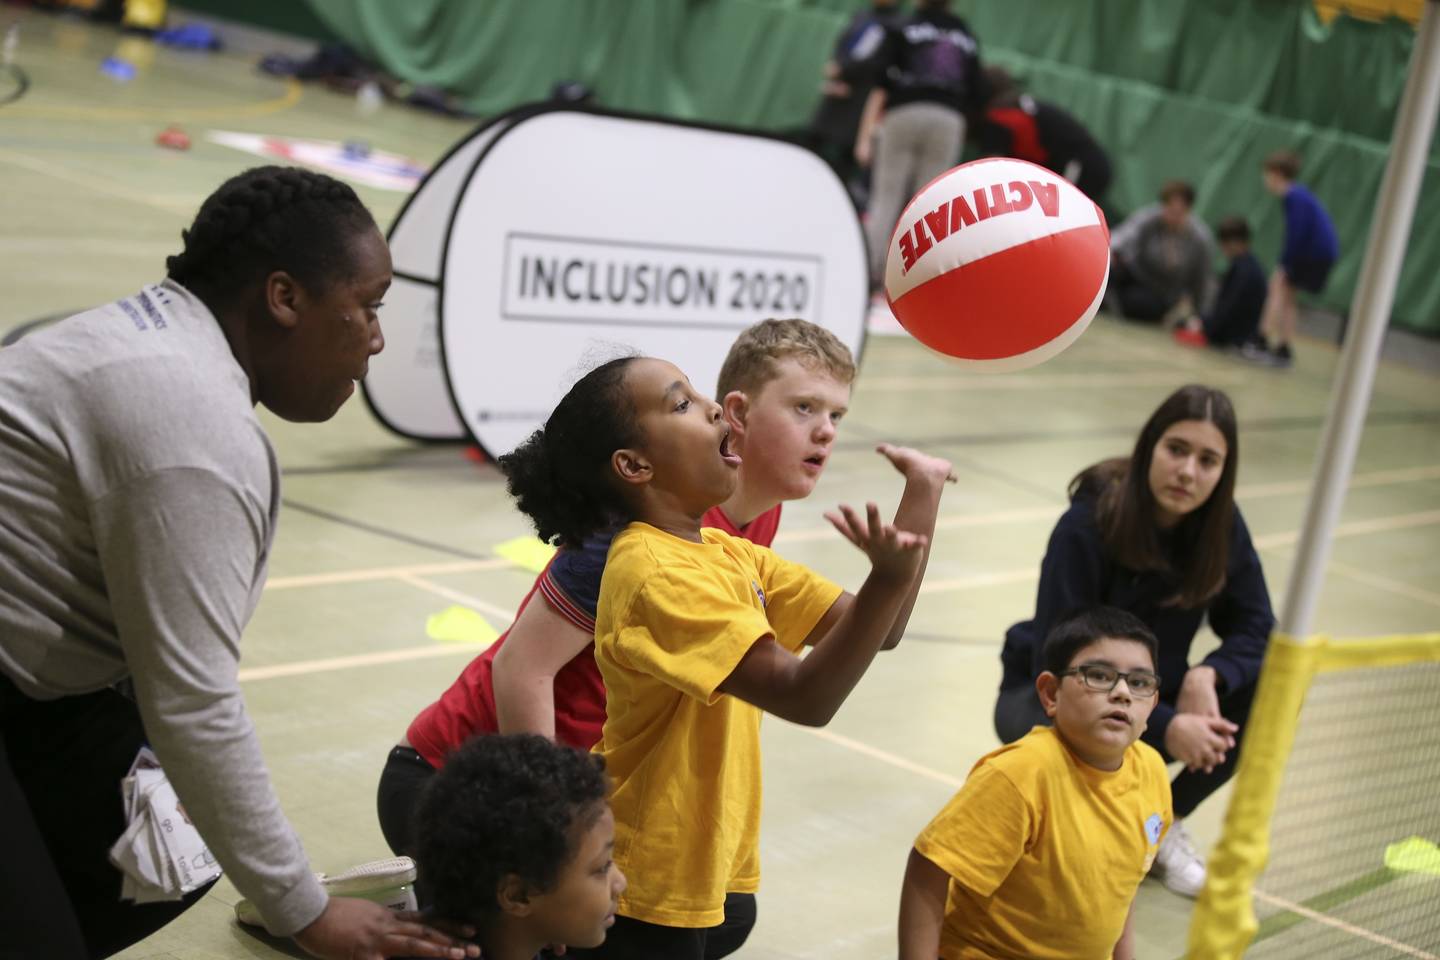 An Inclusion 2020 festival in January 2020. Credit Youth Sport Trust